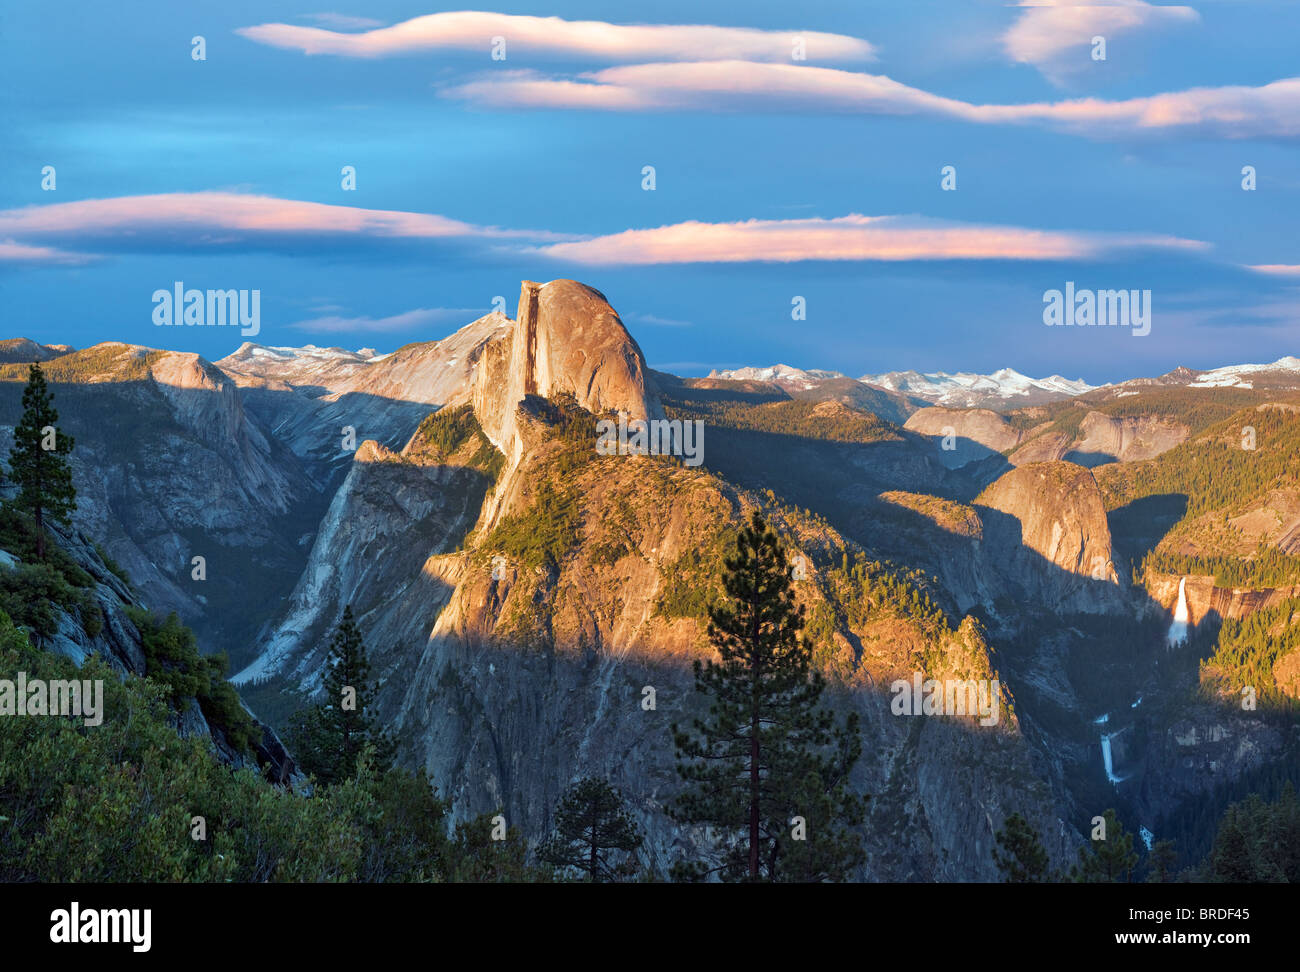 View of Half Dome and waterfalls from Glacier Point with sunset clouds. Yosemite National Park, California. Sky has been added. Stock Photo